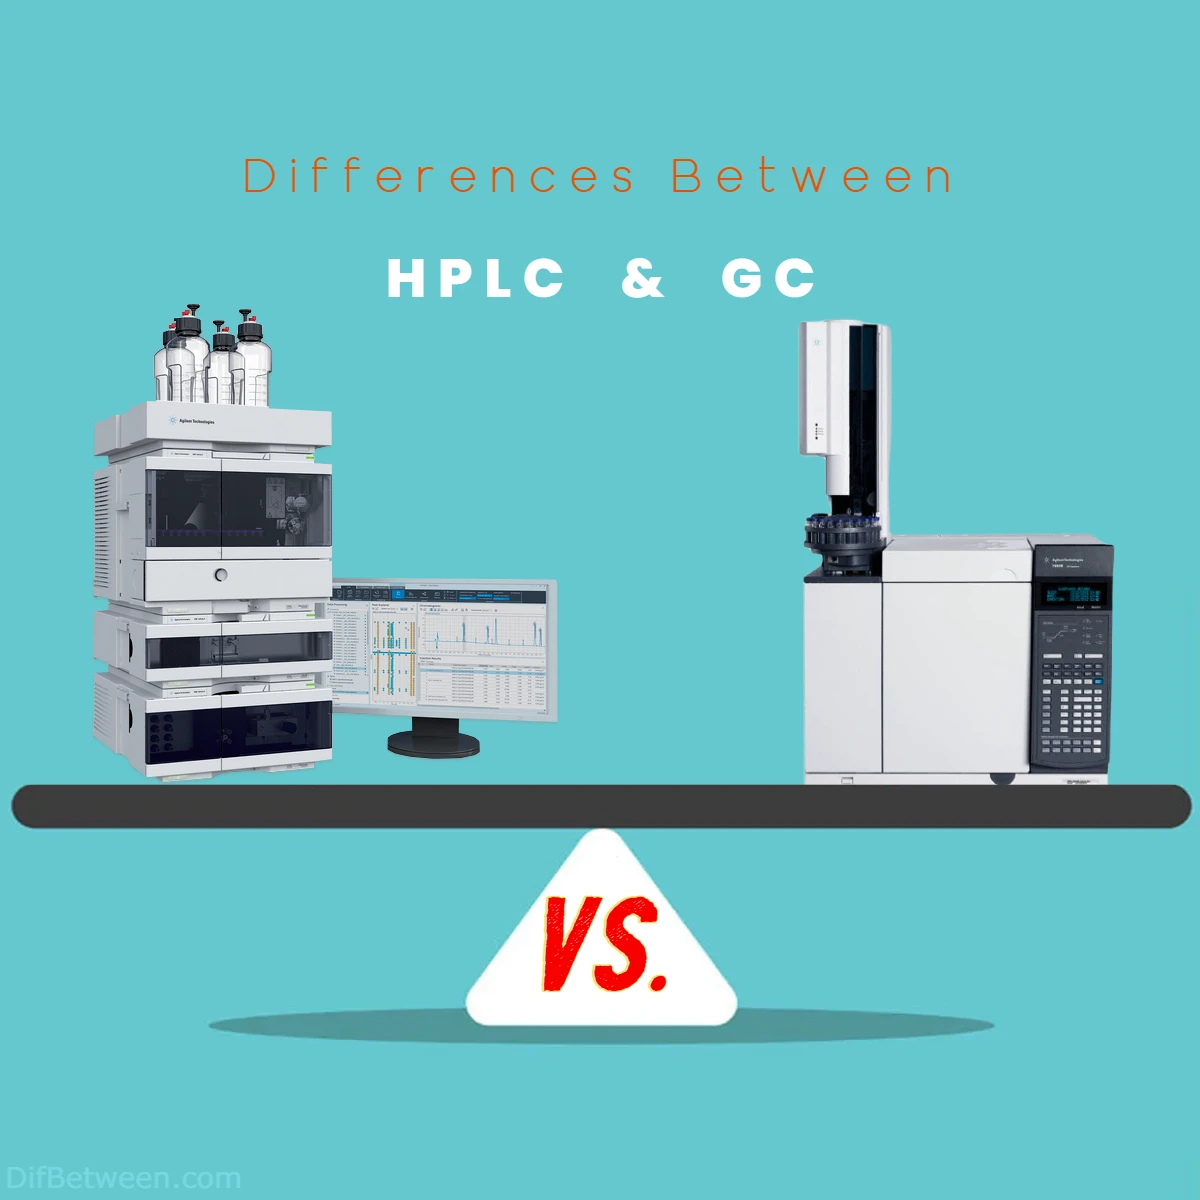 Differences Between HPLC vs GC